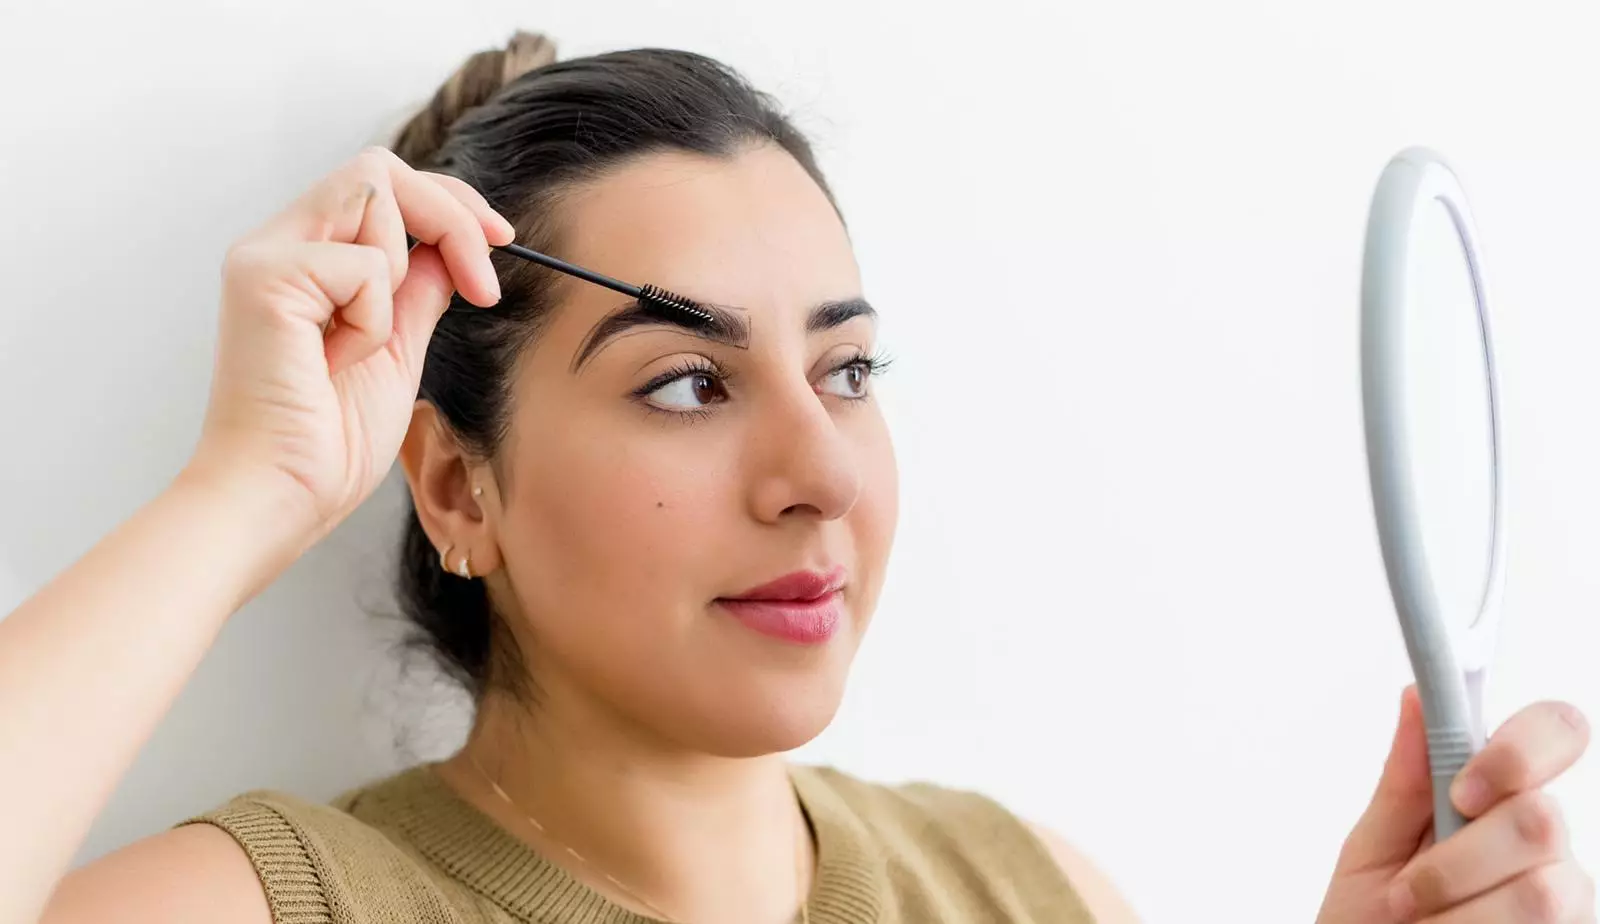 Brow expert shares her step-by-step guide to at-home brow threading with Tyla (